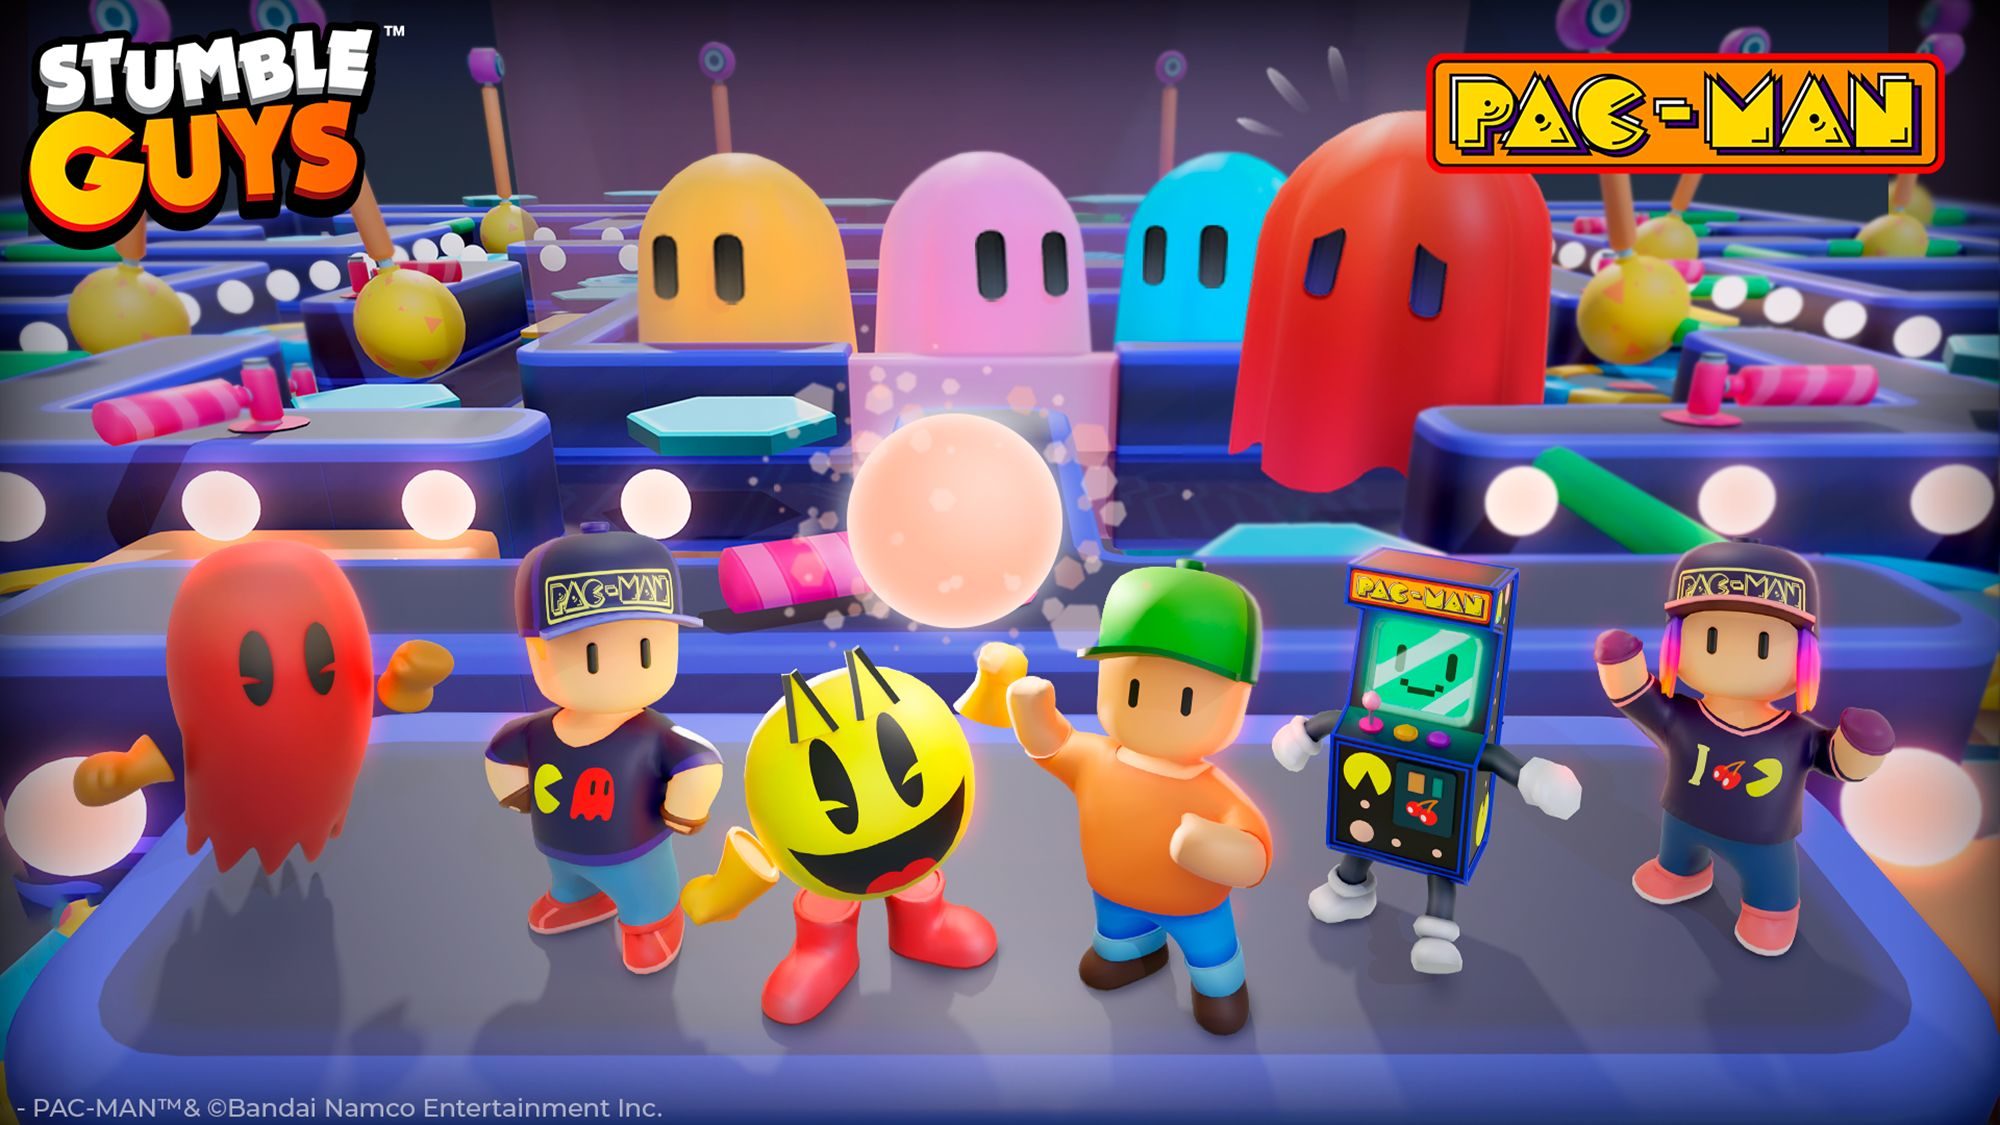 Pac Man Has Munched His Way Into Stumble Guys